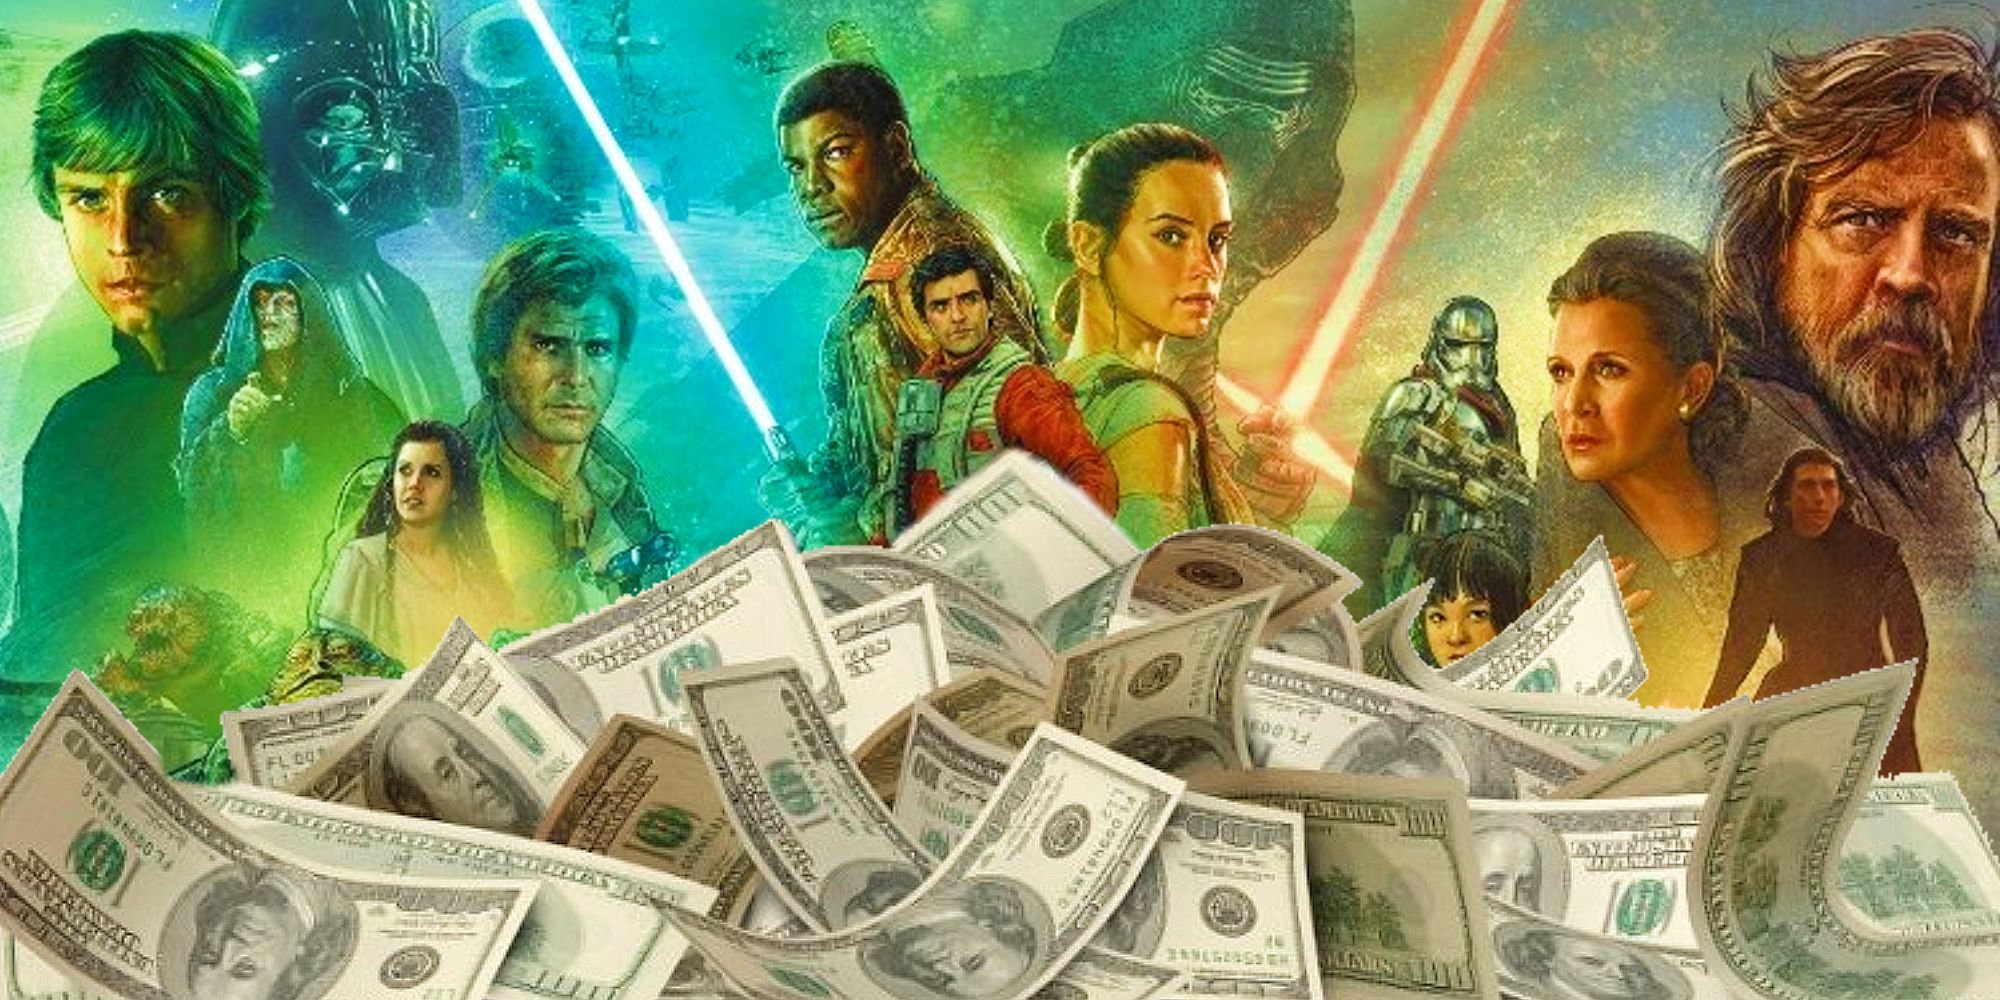 A Star Wars Mural depicting the original and sequel trilogies with a pile of cash